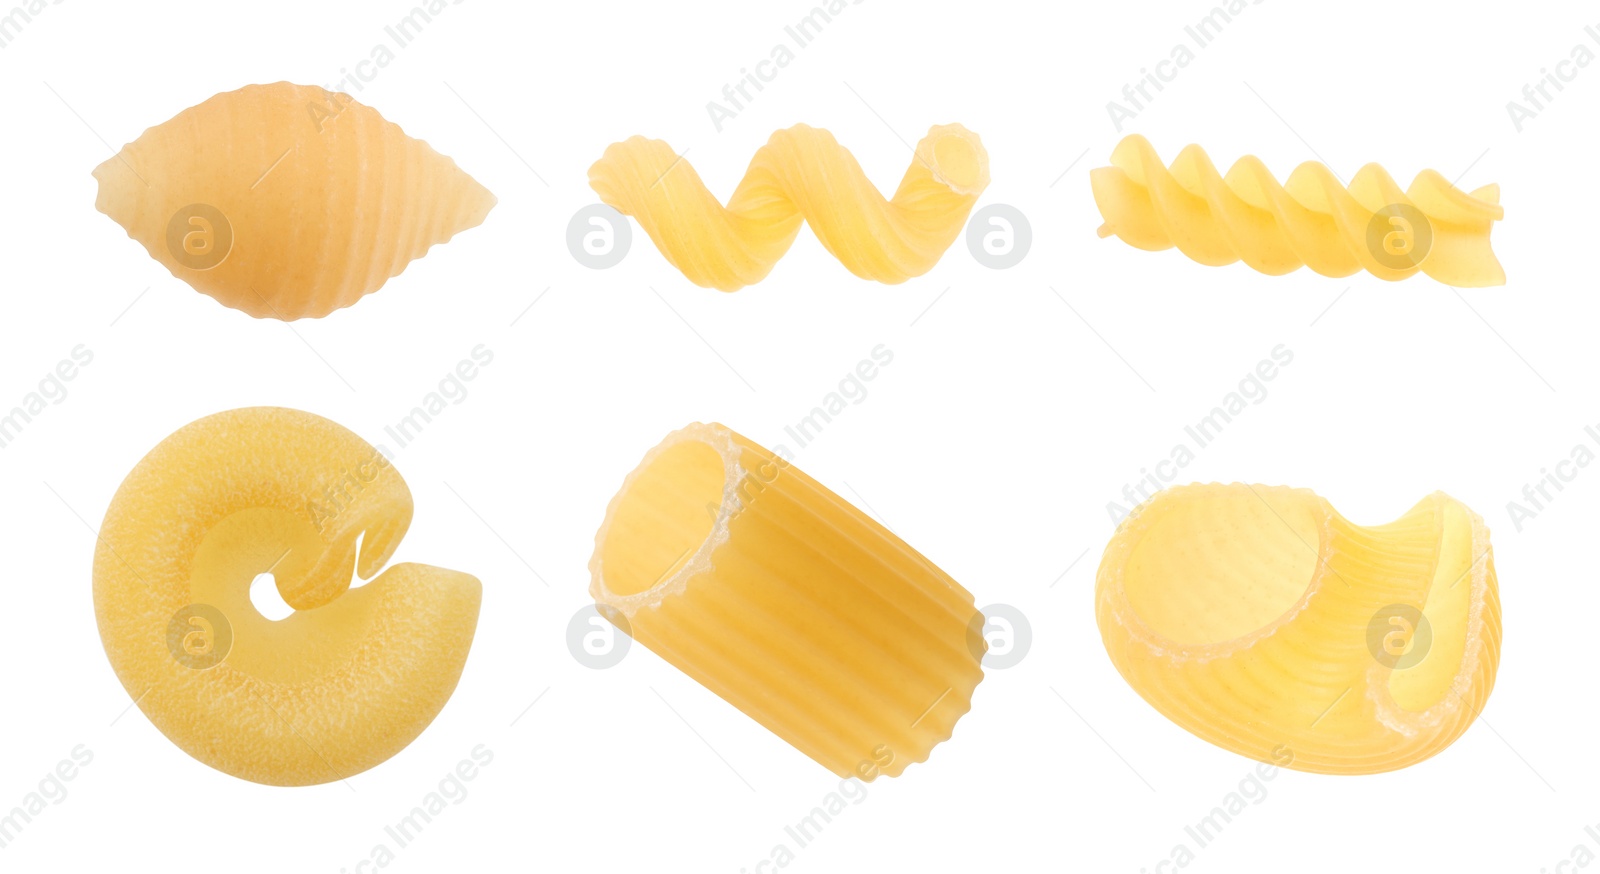 Image of Different types of pasta isolated on white, set